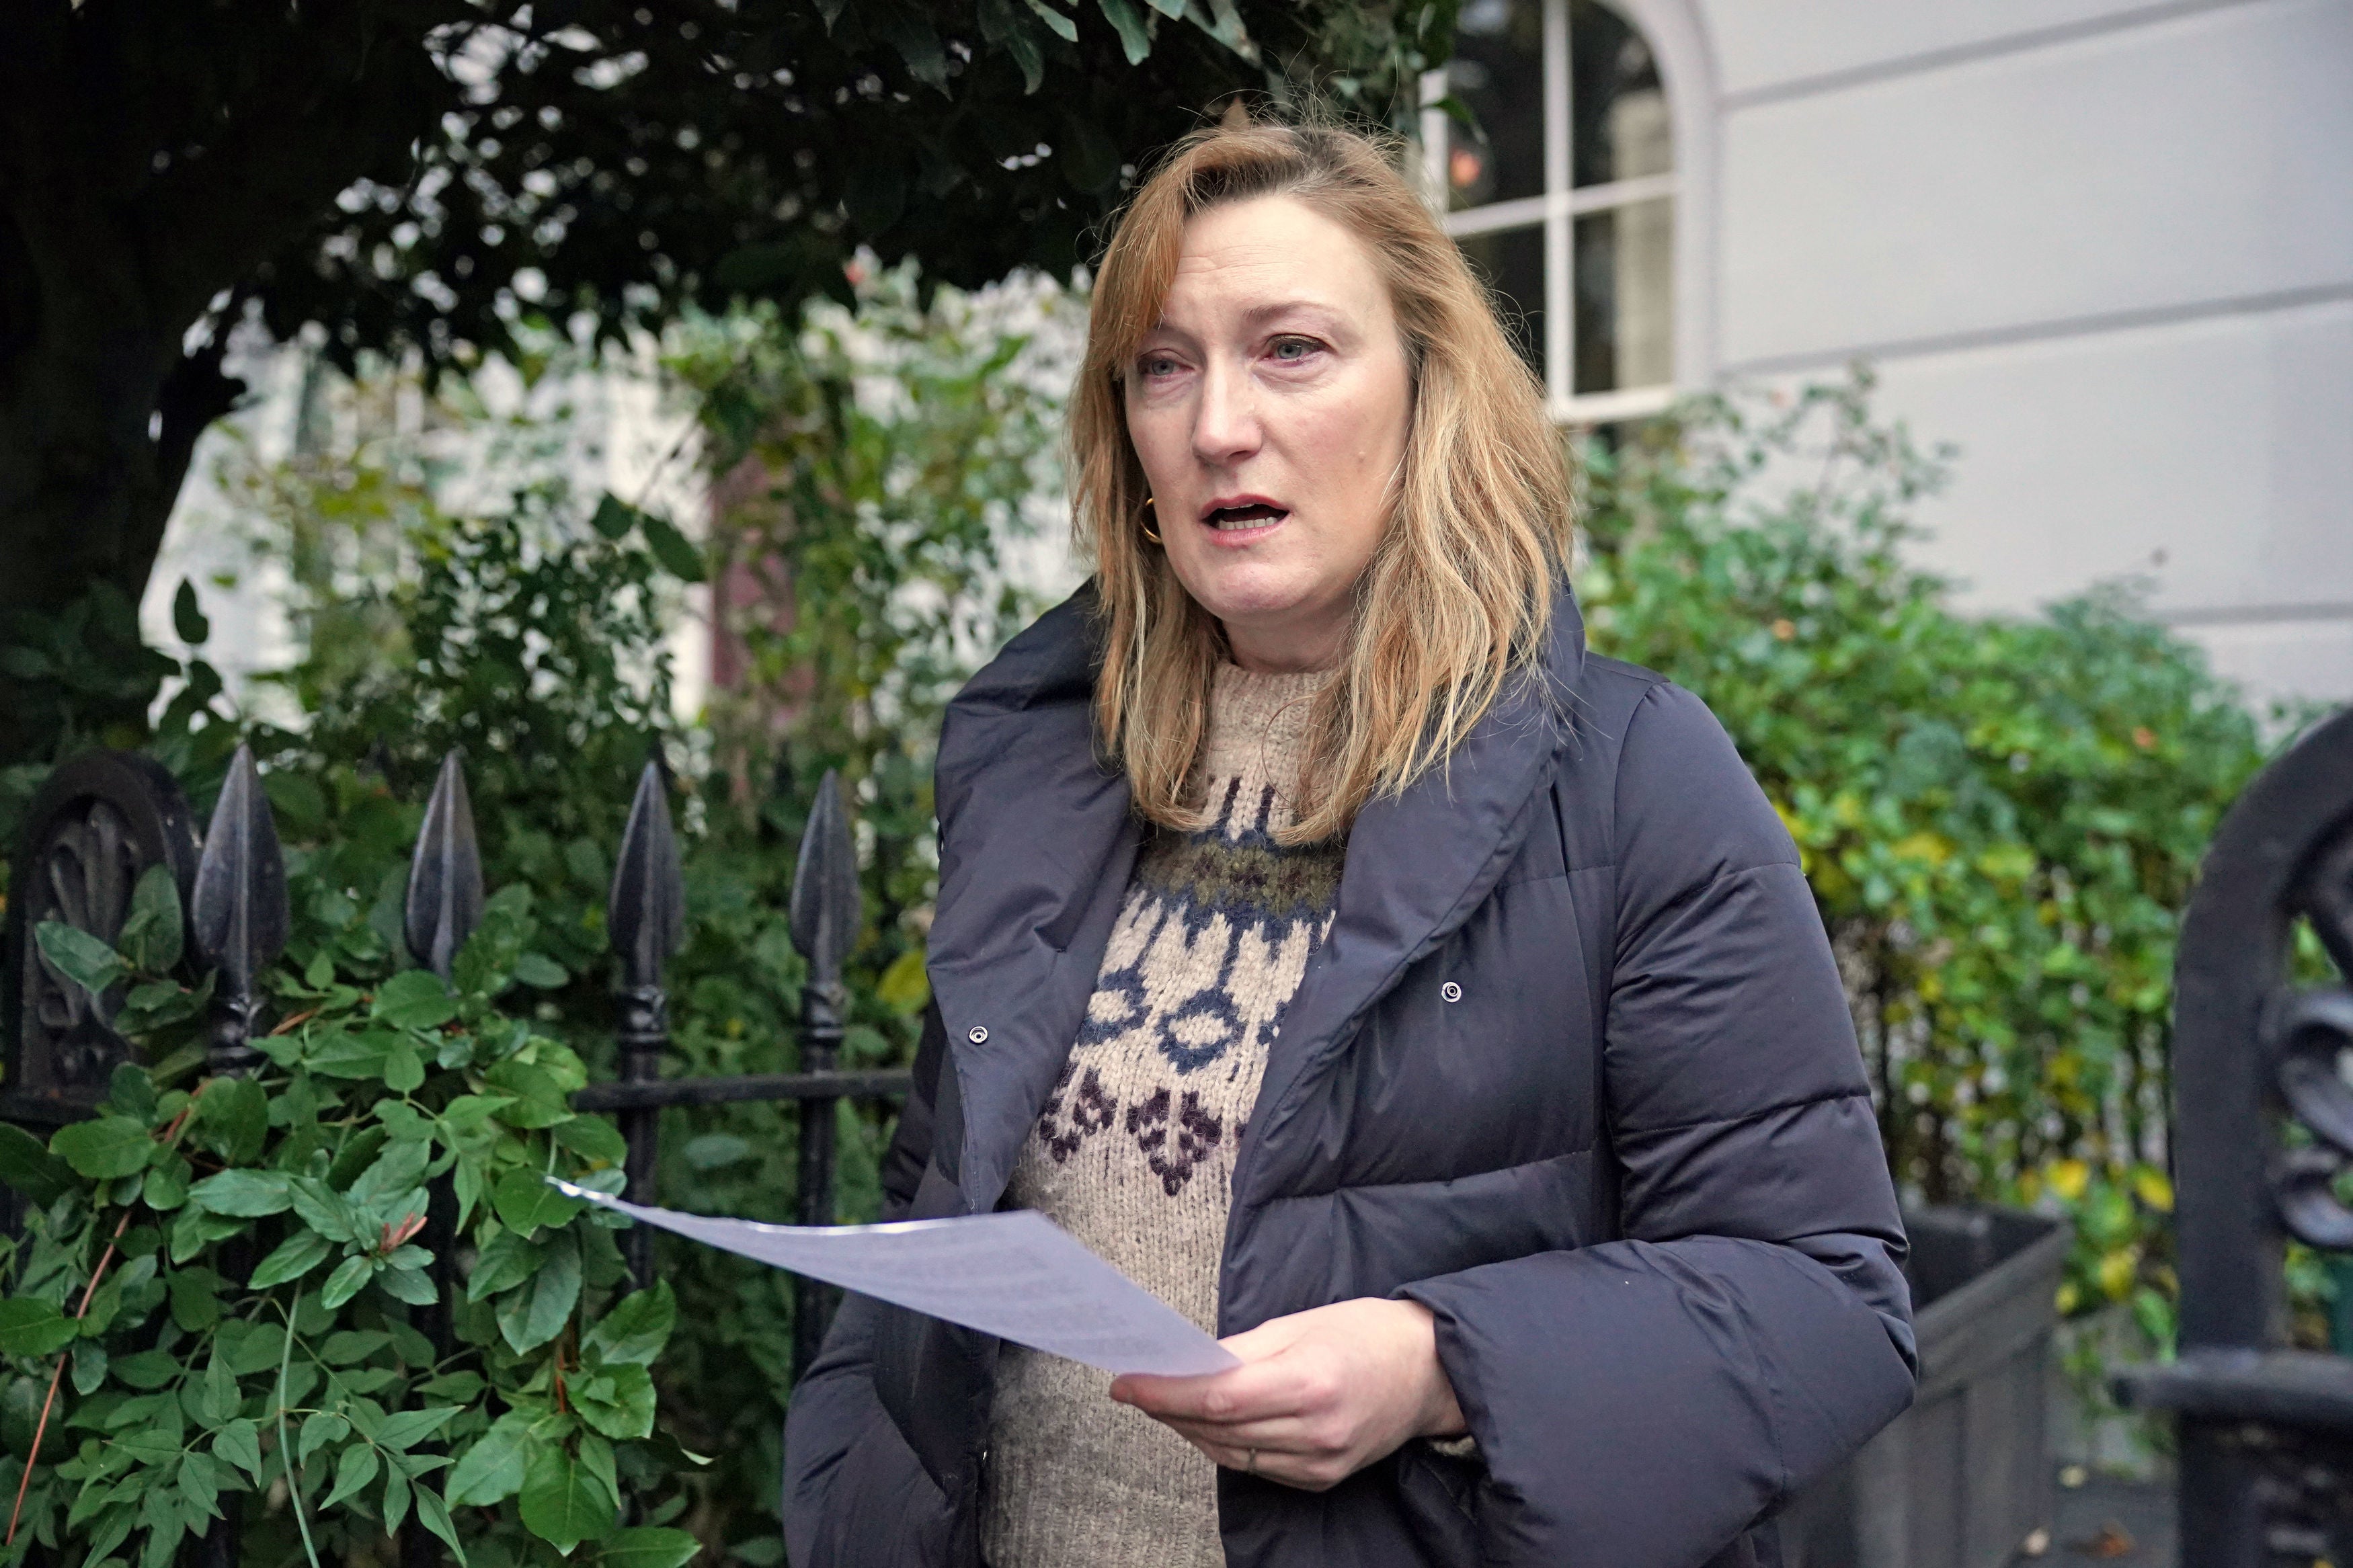 Allegra Stratton reads a statement to the media outside her home on Wednesday